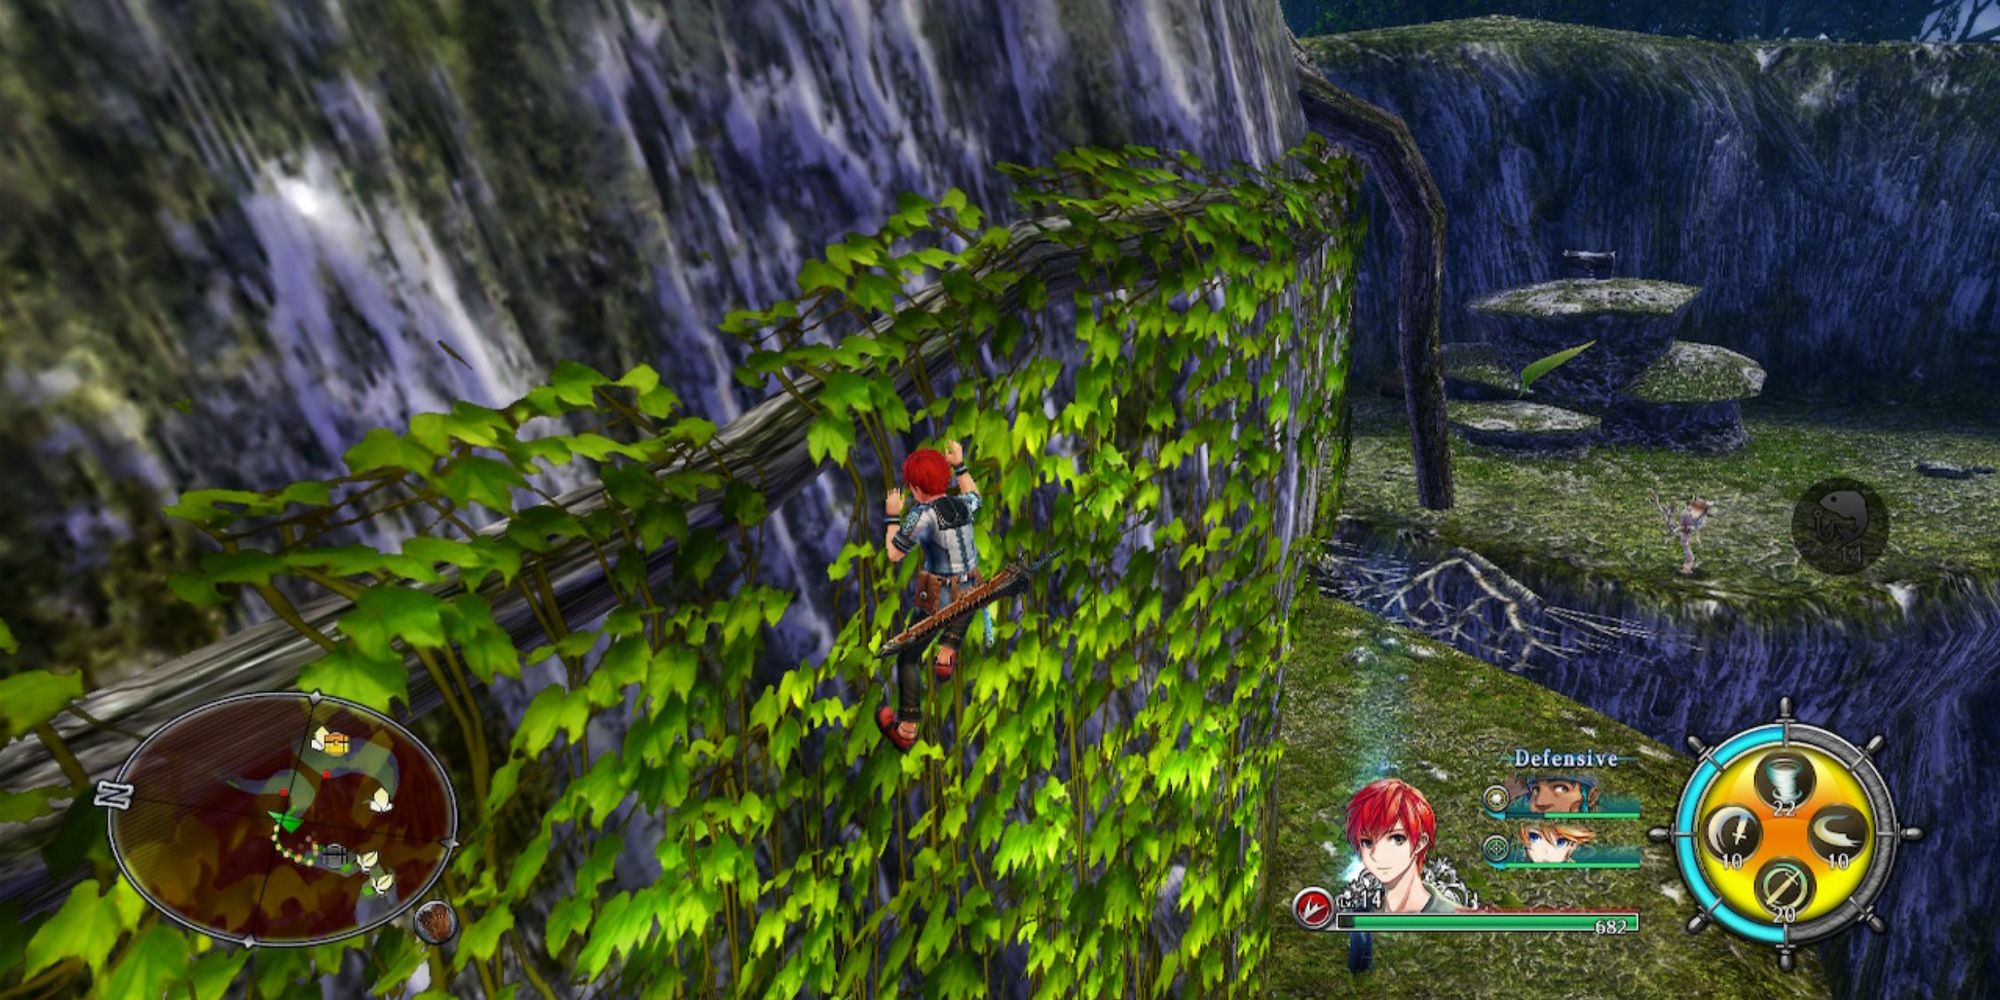 Climbing on Ivy Walls with the Grip Gloves Adventure Gear in Ys 8: Lacrimosa of Dana